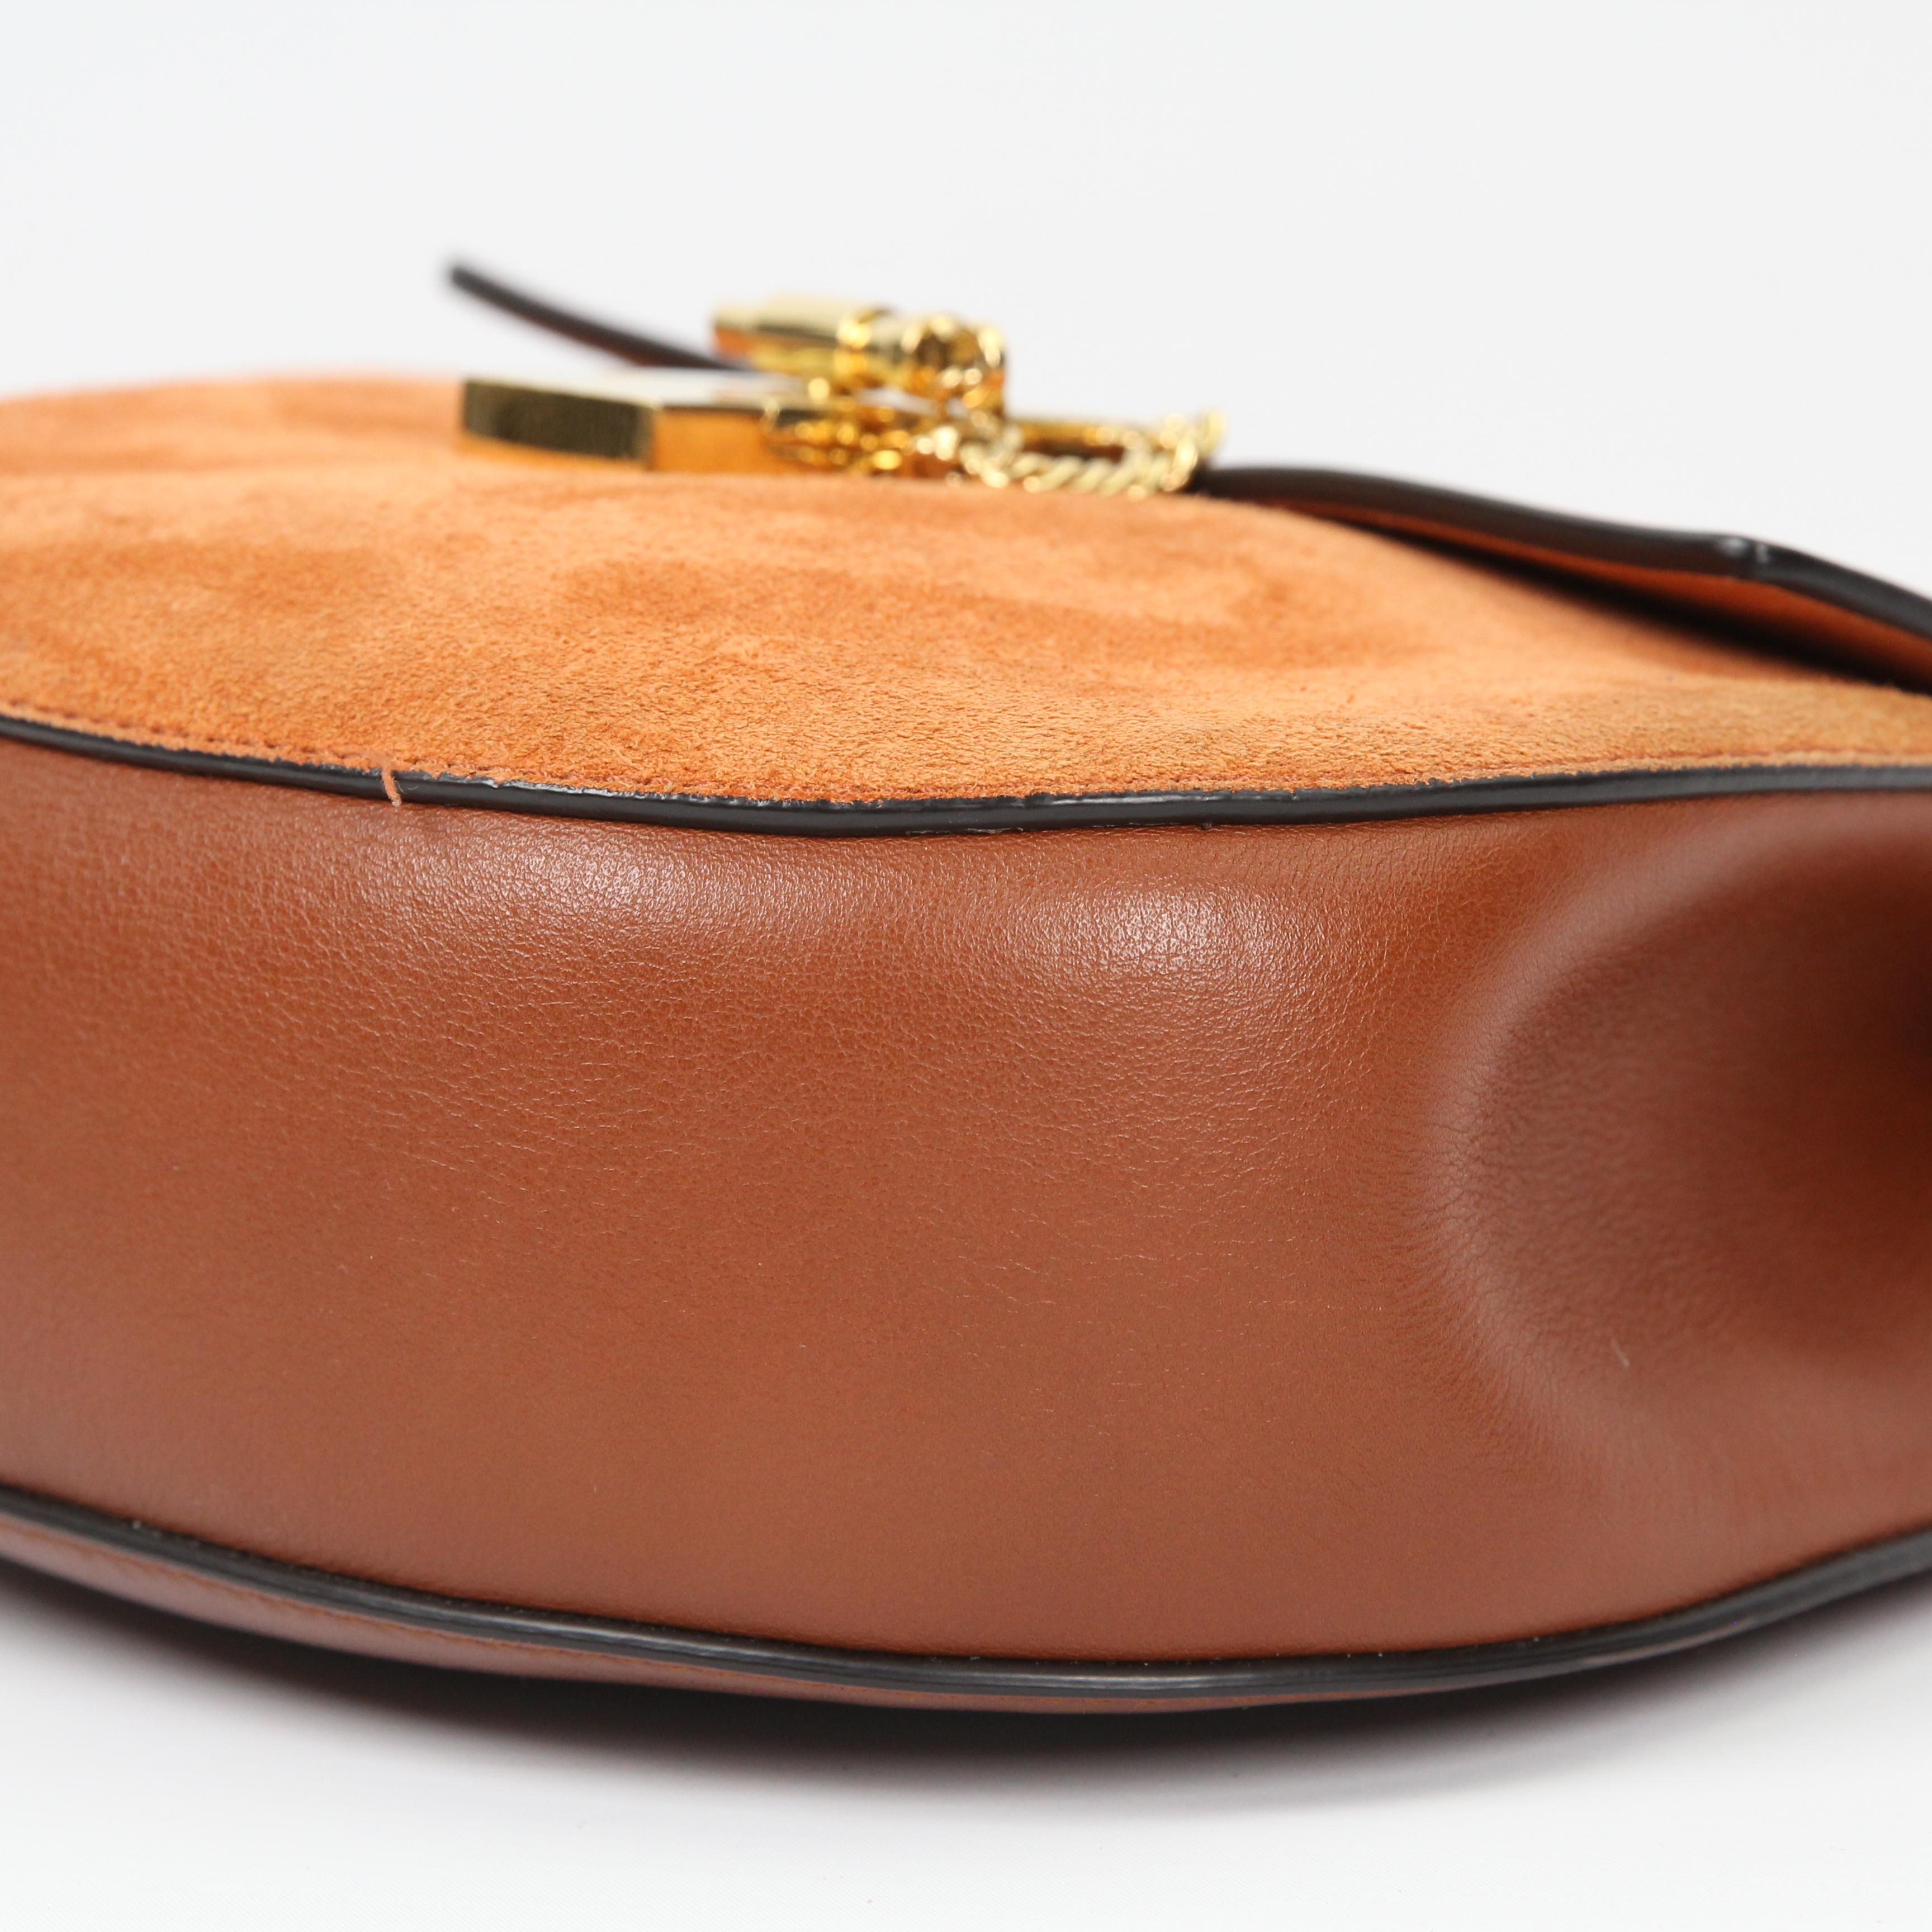 Chloé Drew leather crossbody bag In Excellent Condition For Sale In Rīga, LV